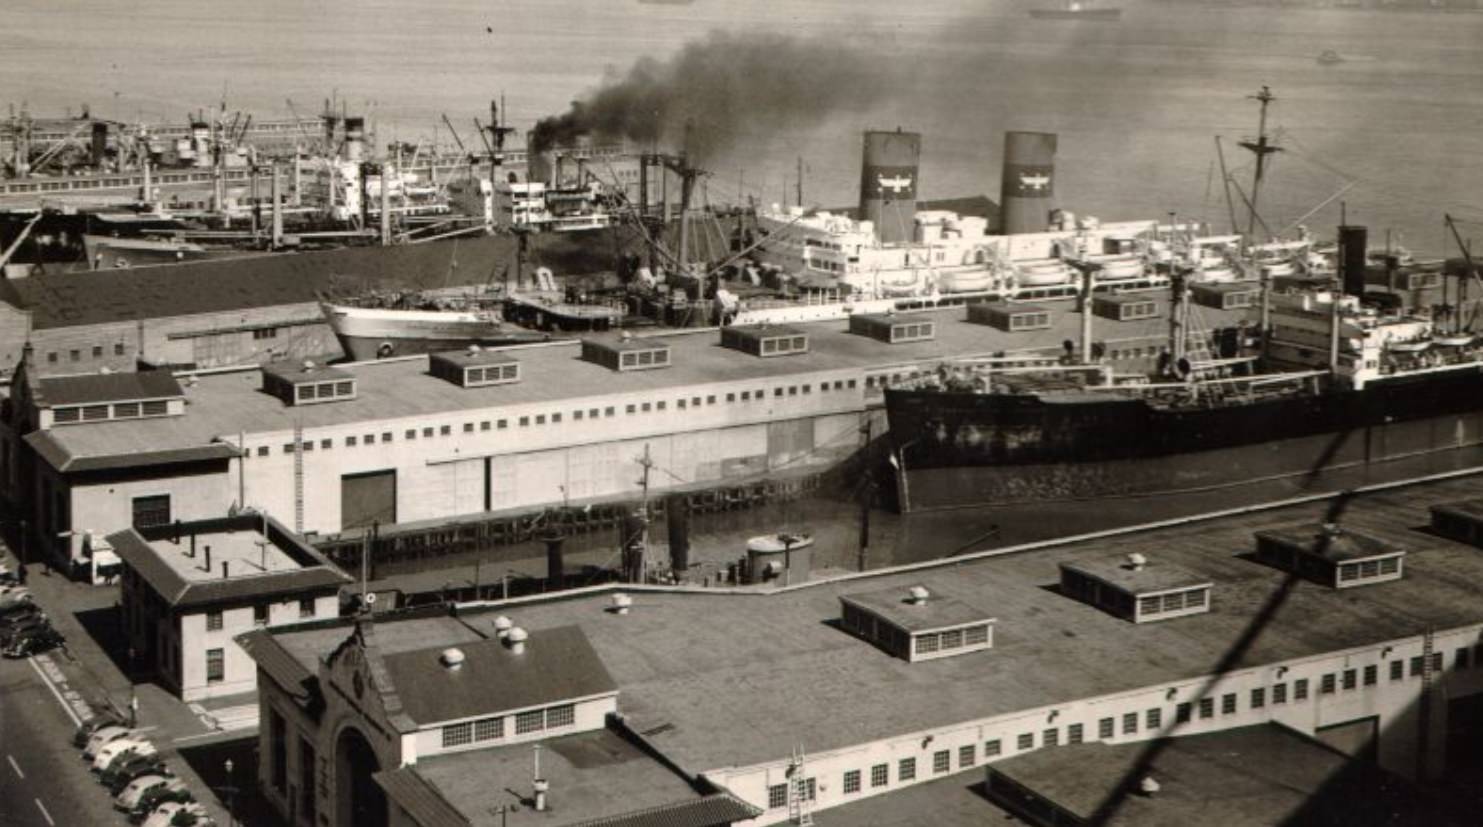 View of ships docked at San Francisco piers, looking north from the Bay Bridge, 1946